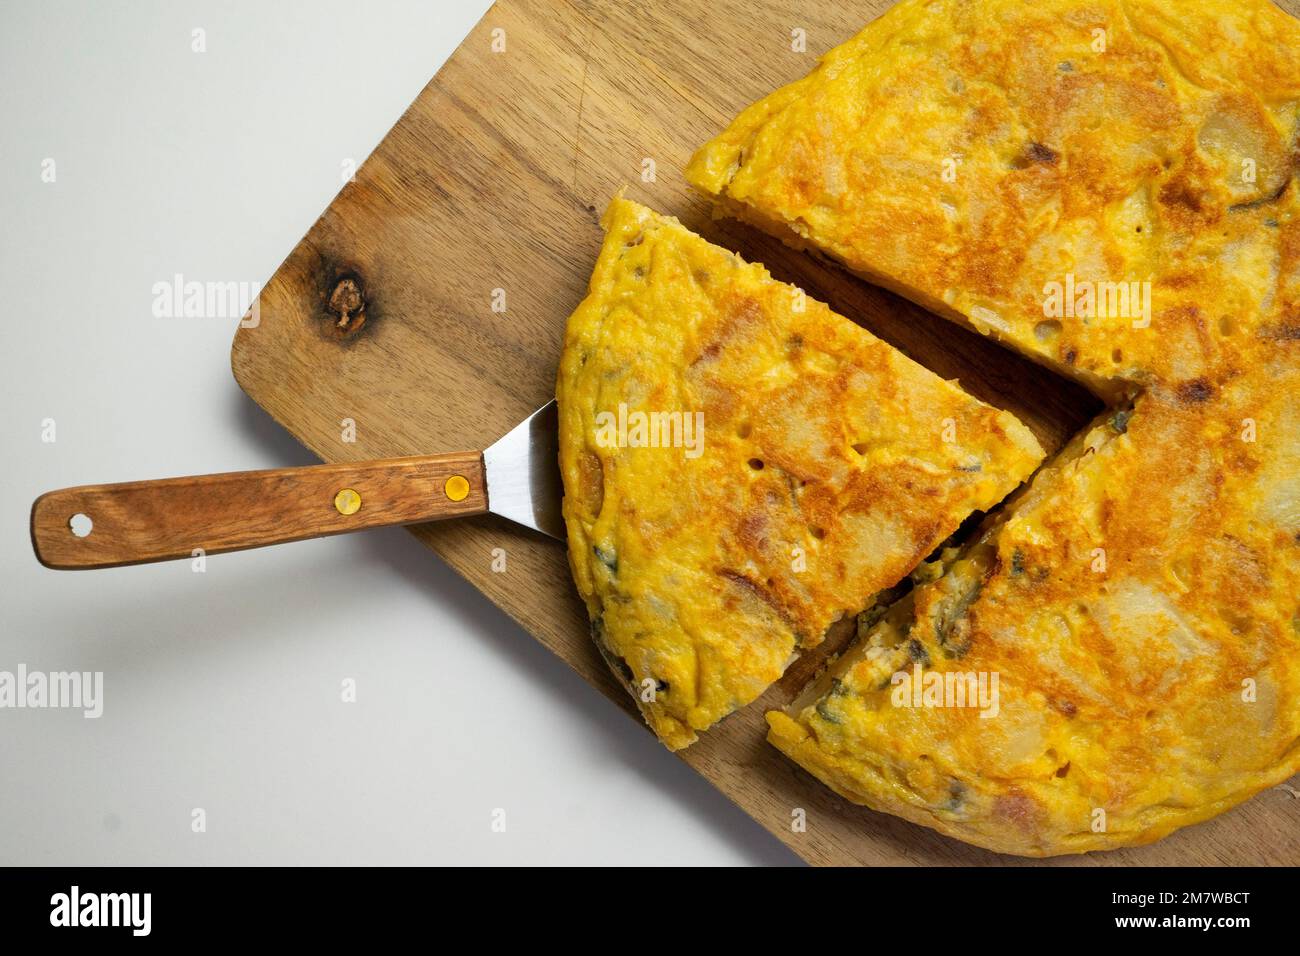 The potato omelette, or Spanish omelette is an omelette or omelette to which chopped potatoes are added. Stock Photo